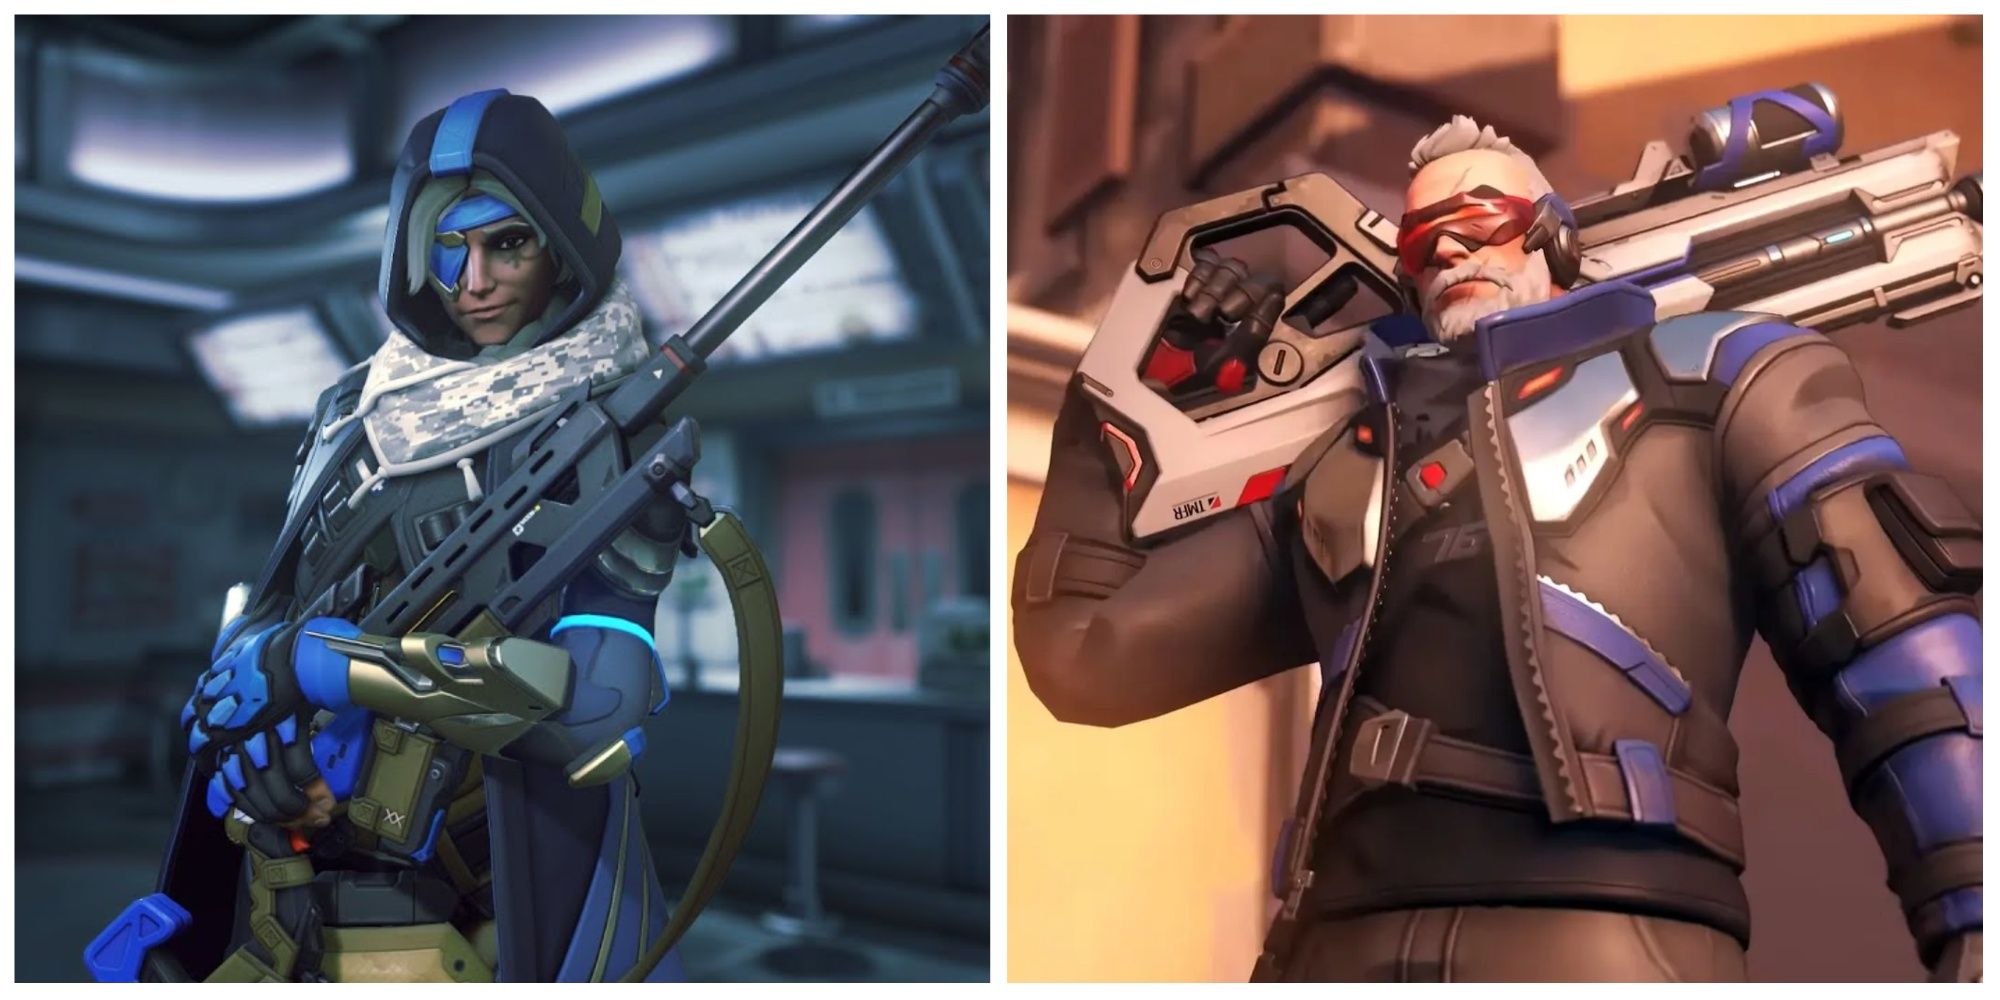 Overwatch 2 screenshot of characters Ana (left) and Soldier 76 (right)